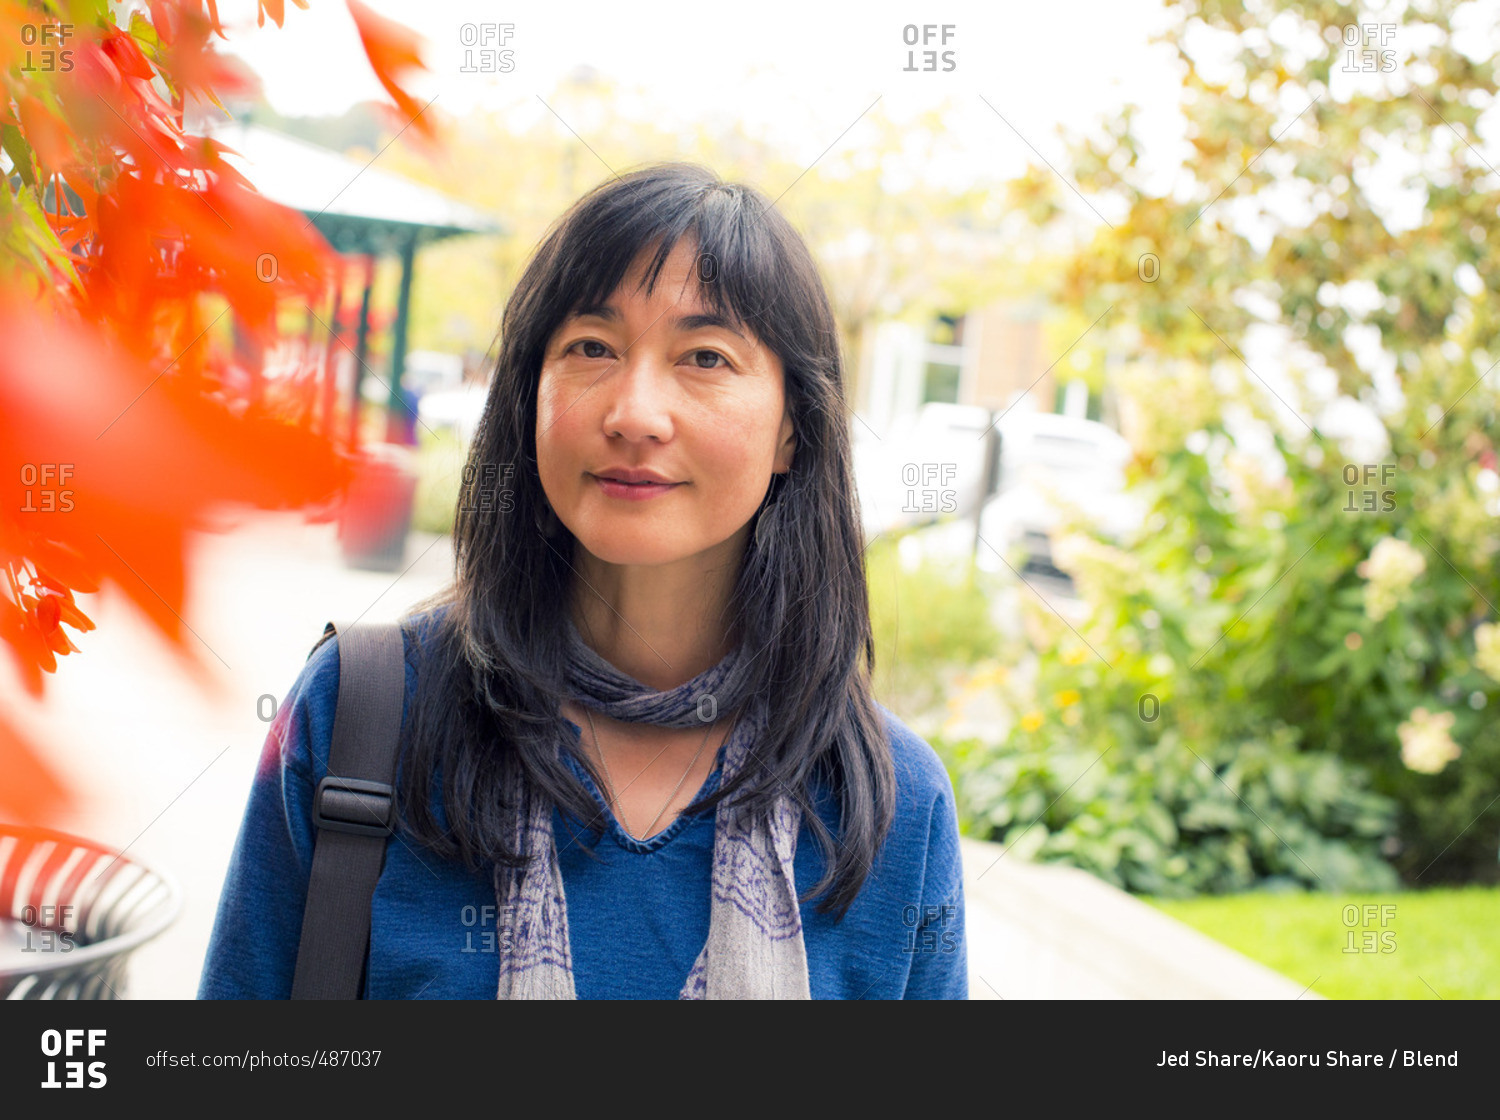 Japanese woman smiling near autumn leaves